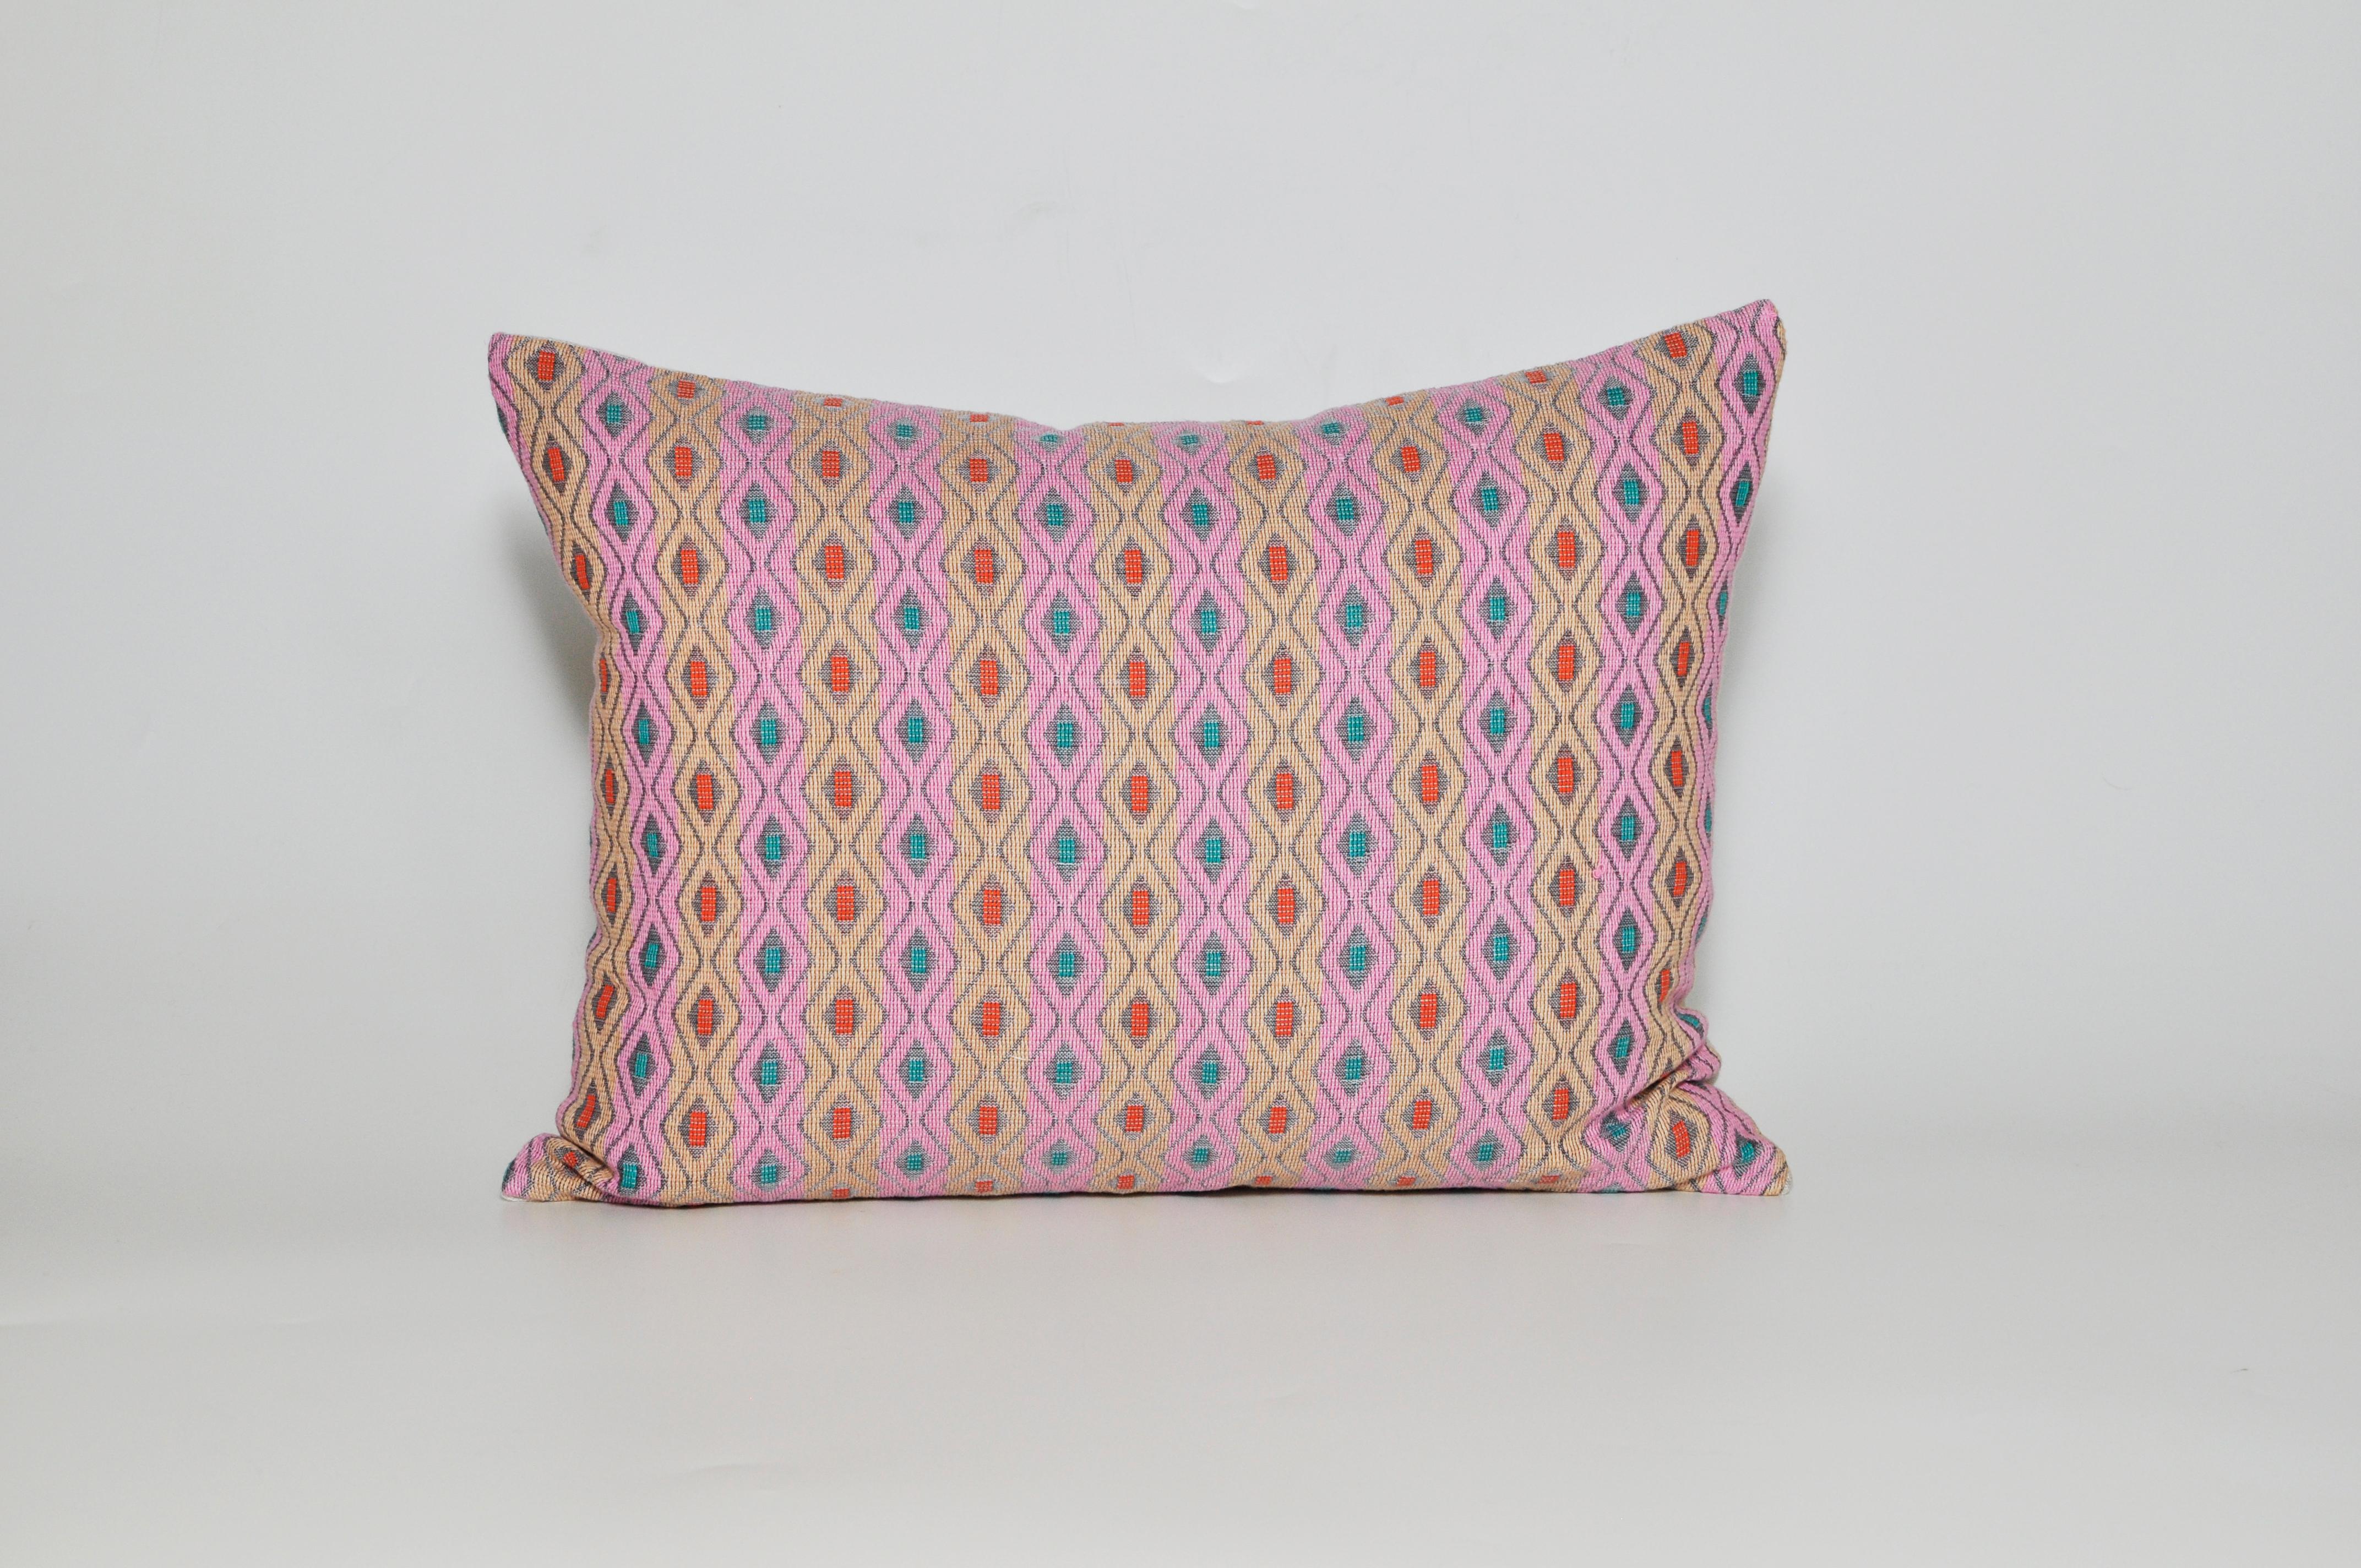 Vintage Nepali pink orange green and yellow Dhaka with Irish linen cushion pillow

Beautiful luxury pillow (cushion) created from vintage ethnic fabric backed in pure Irish linen. Dhaka is the traditional handmade fabric of the indigenous ‘Limbu’